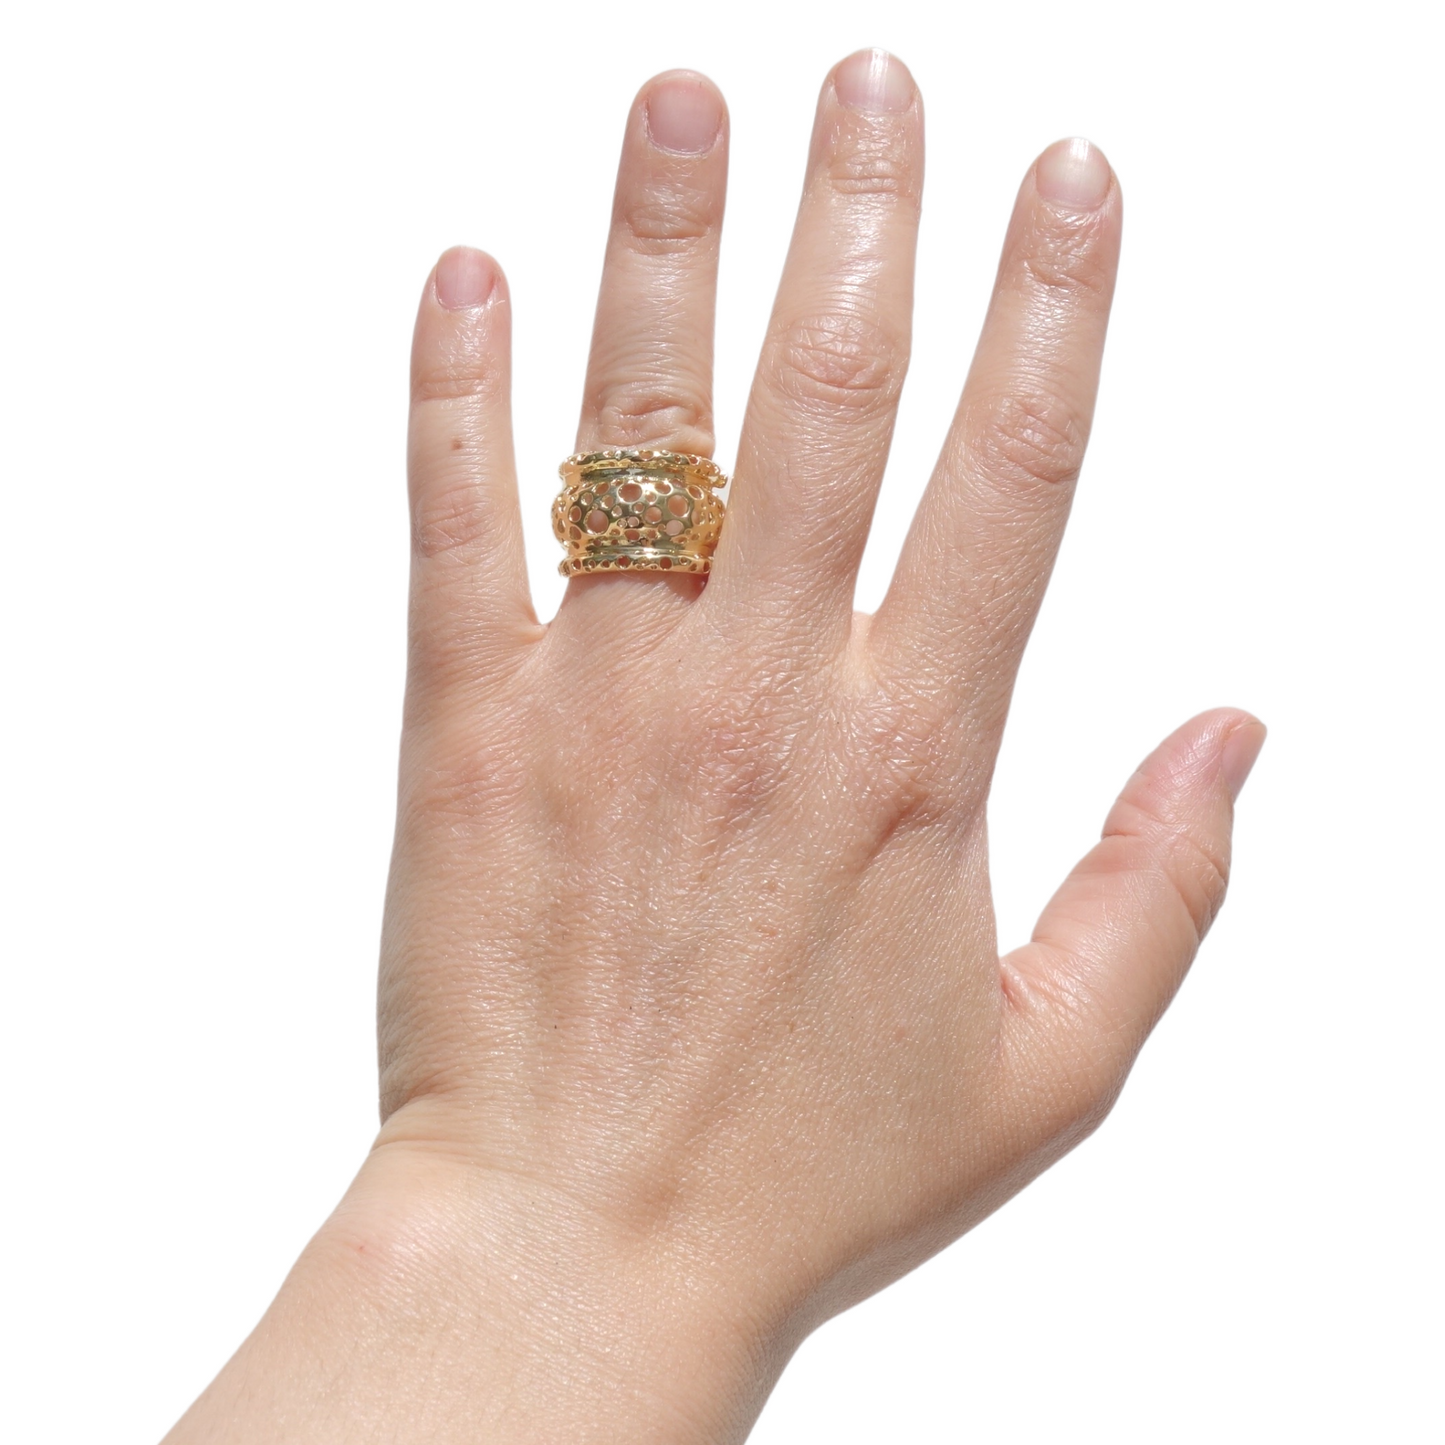 SOLID GOLD 14K Wide Ring, Bubbles Textured Ring, Unique Wedding Band